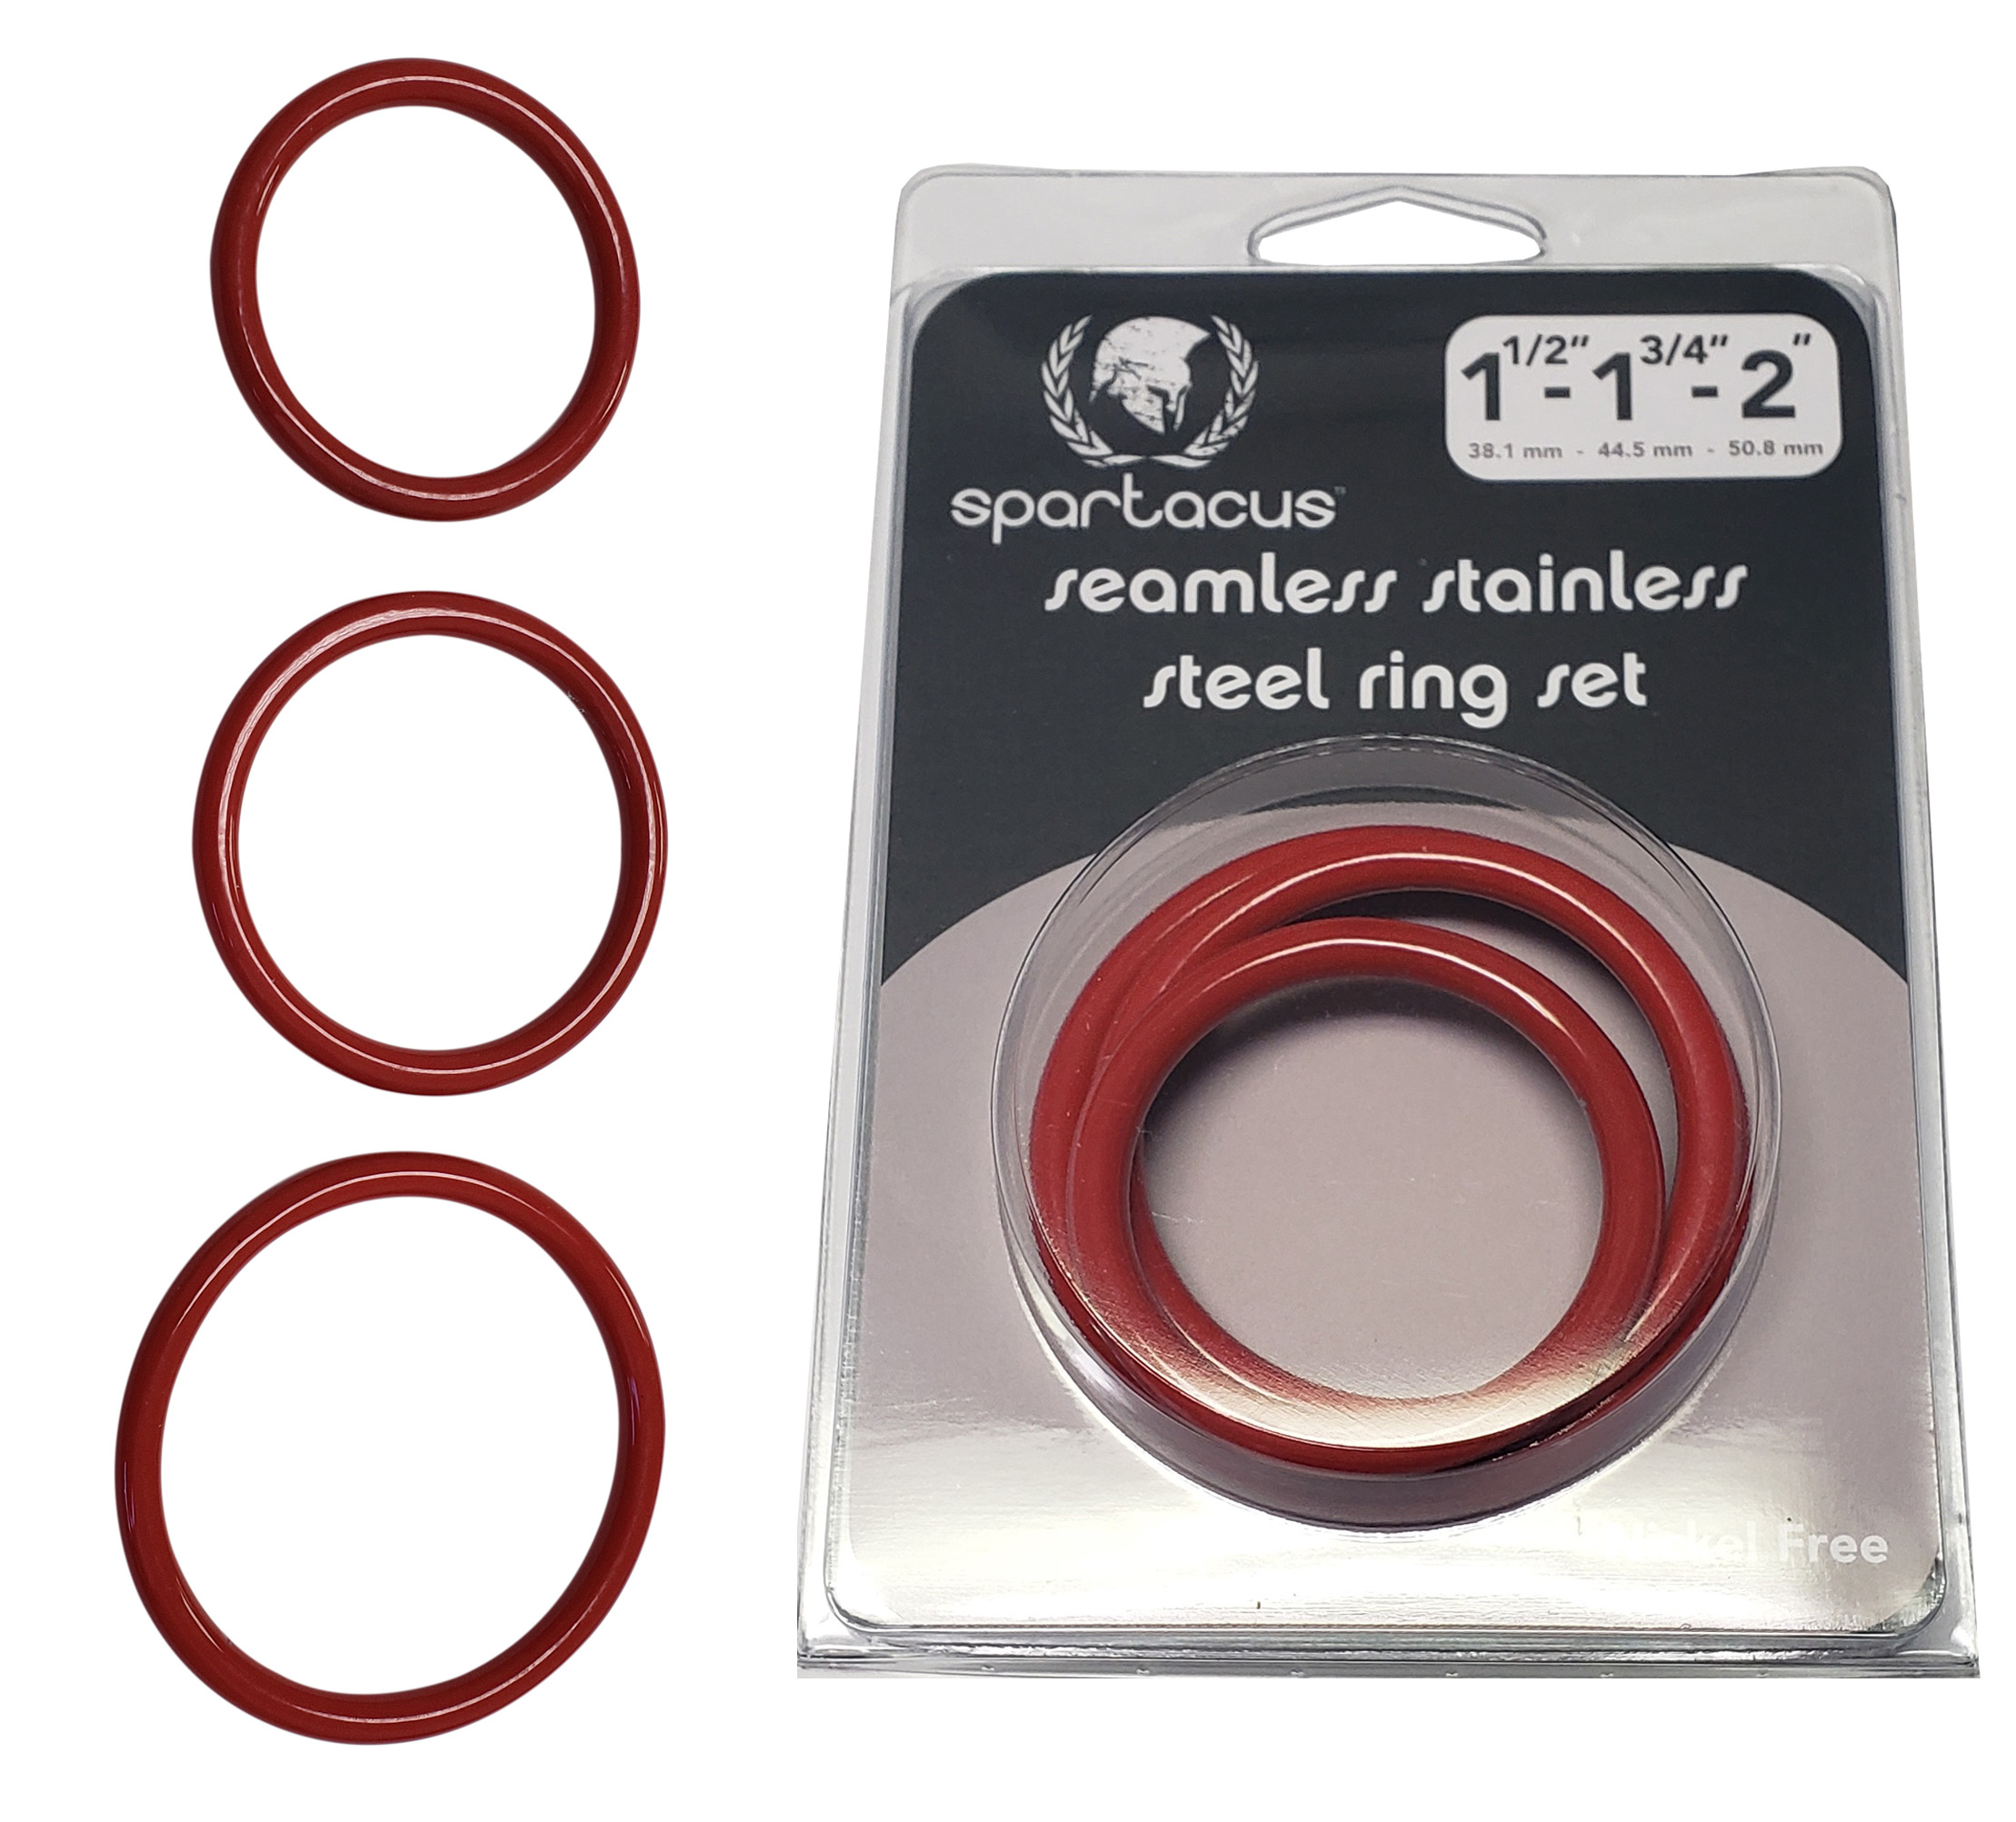 SPARTACUS Red Seamless Stainless Steel C-Ring Set-1.5", 1.75" & 2"